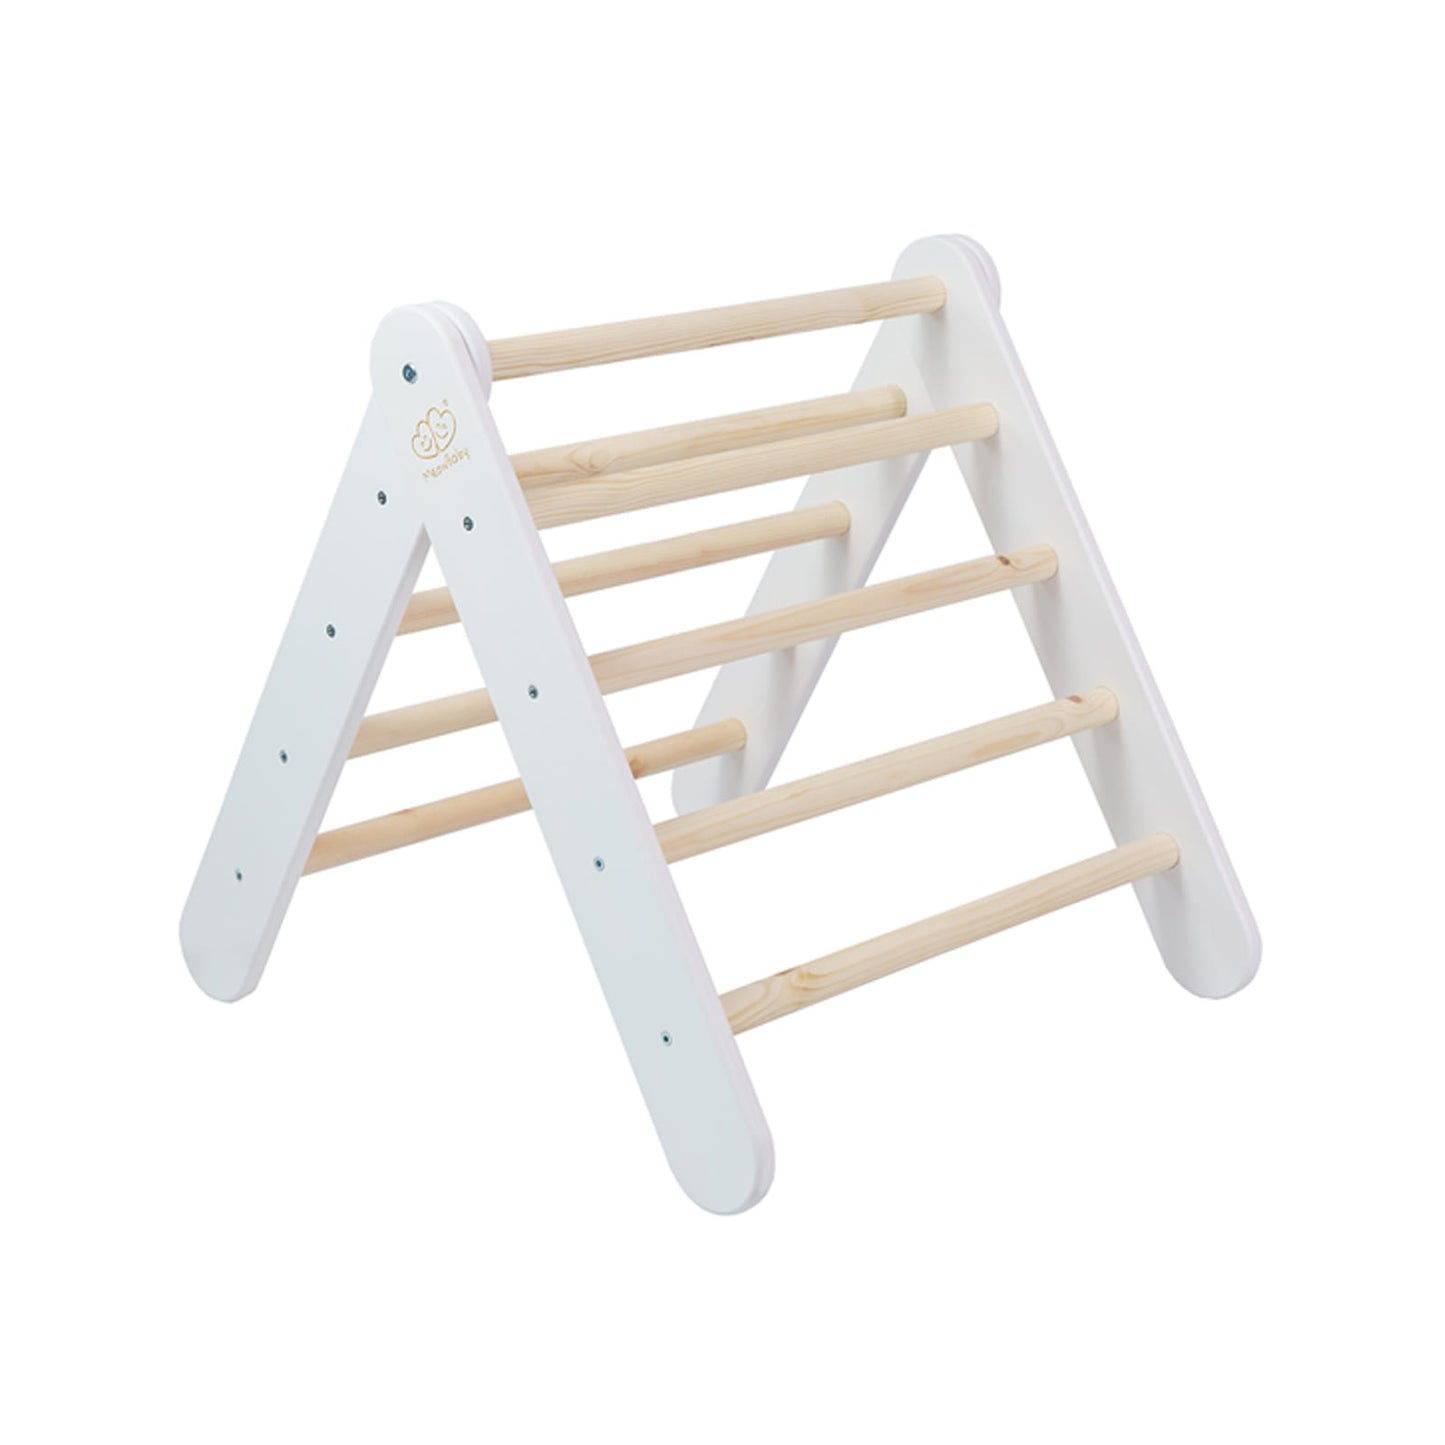 MeowBaby® Wooden Pikler for Children Climbing Triangle for Kids, White